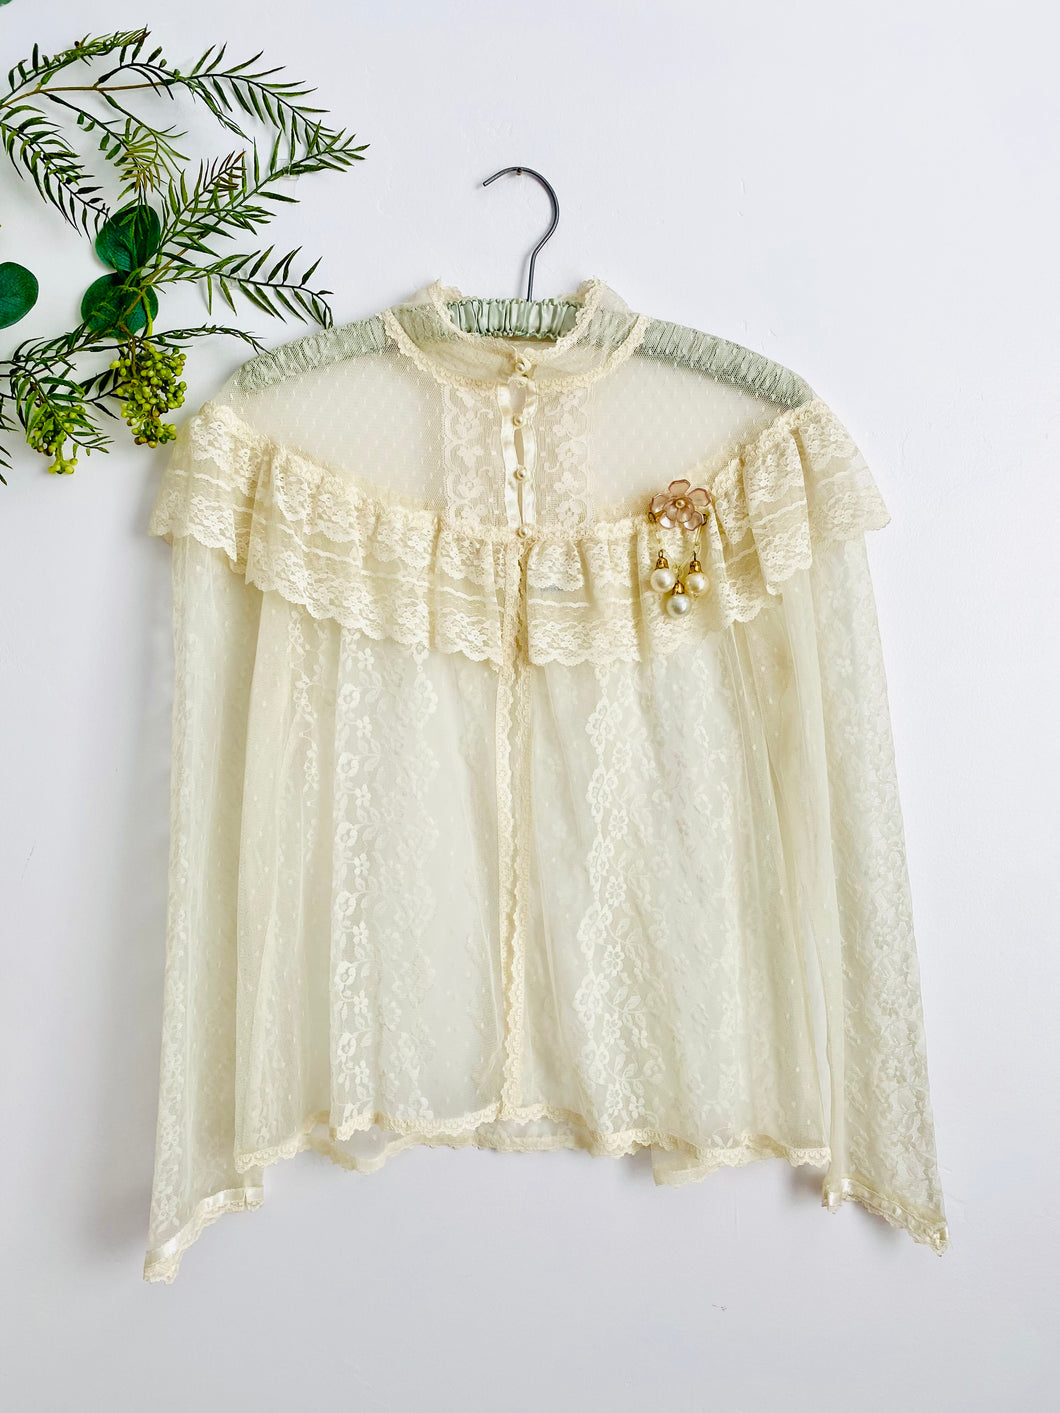 Vintage 1970s victorian style tulle lace blouse